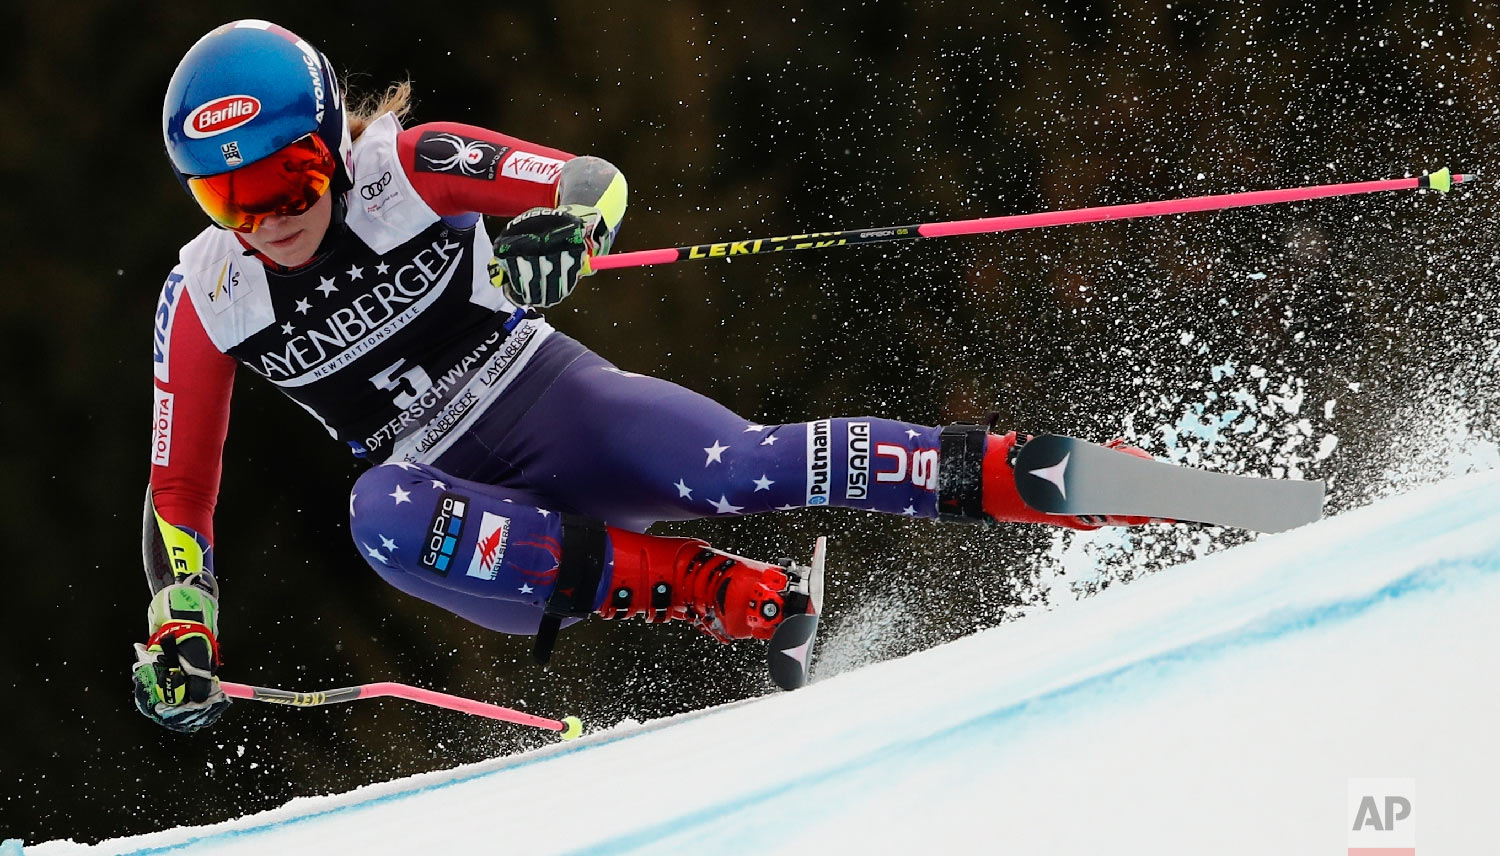  United States' Mikaela Shiffrin speeds down the course during an alpine ski, women's World Cup giant slalom, in Ofterschwang, Germany, on March 9, 2018. (AP Photo/Gabriele Facciotti) 